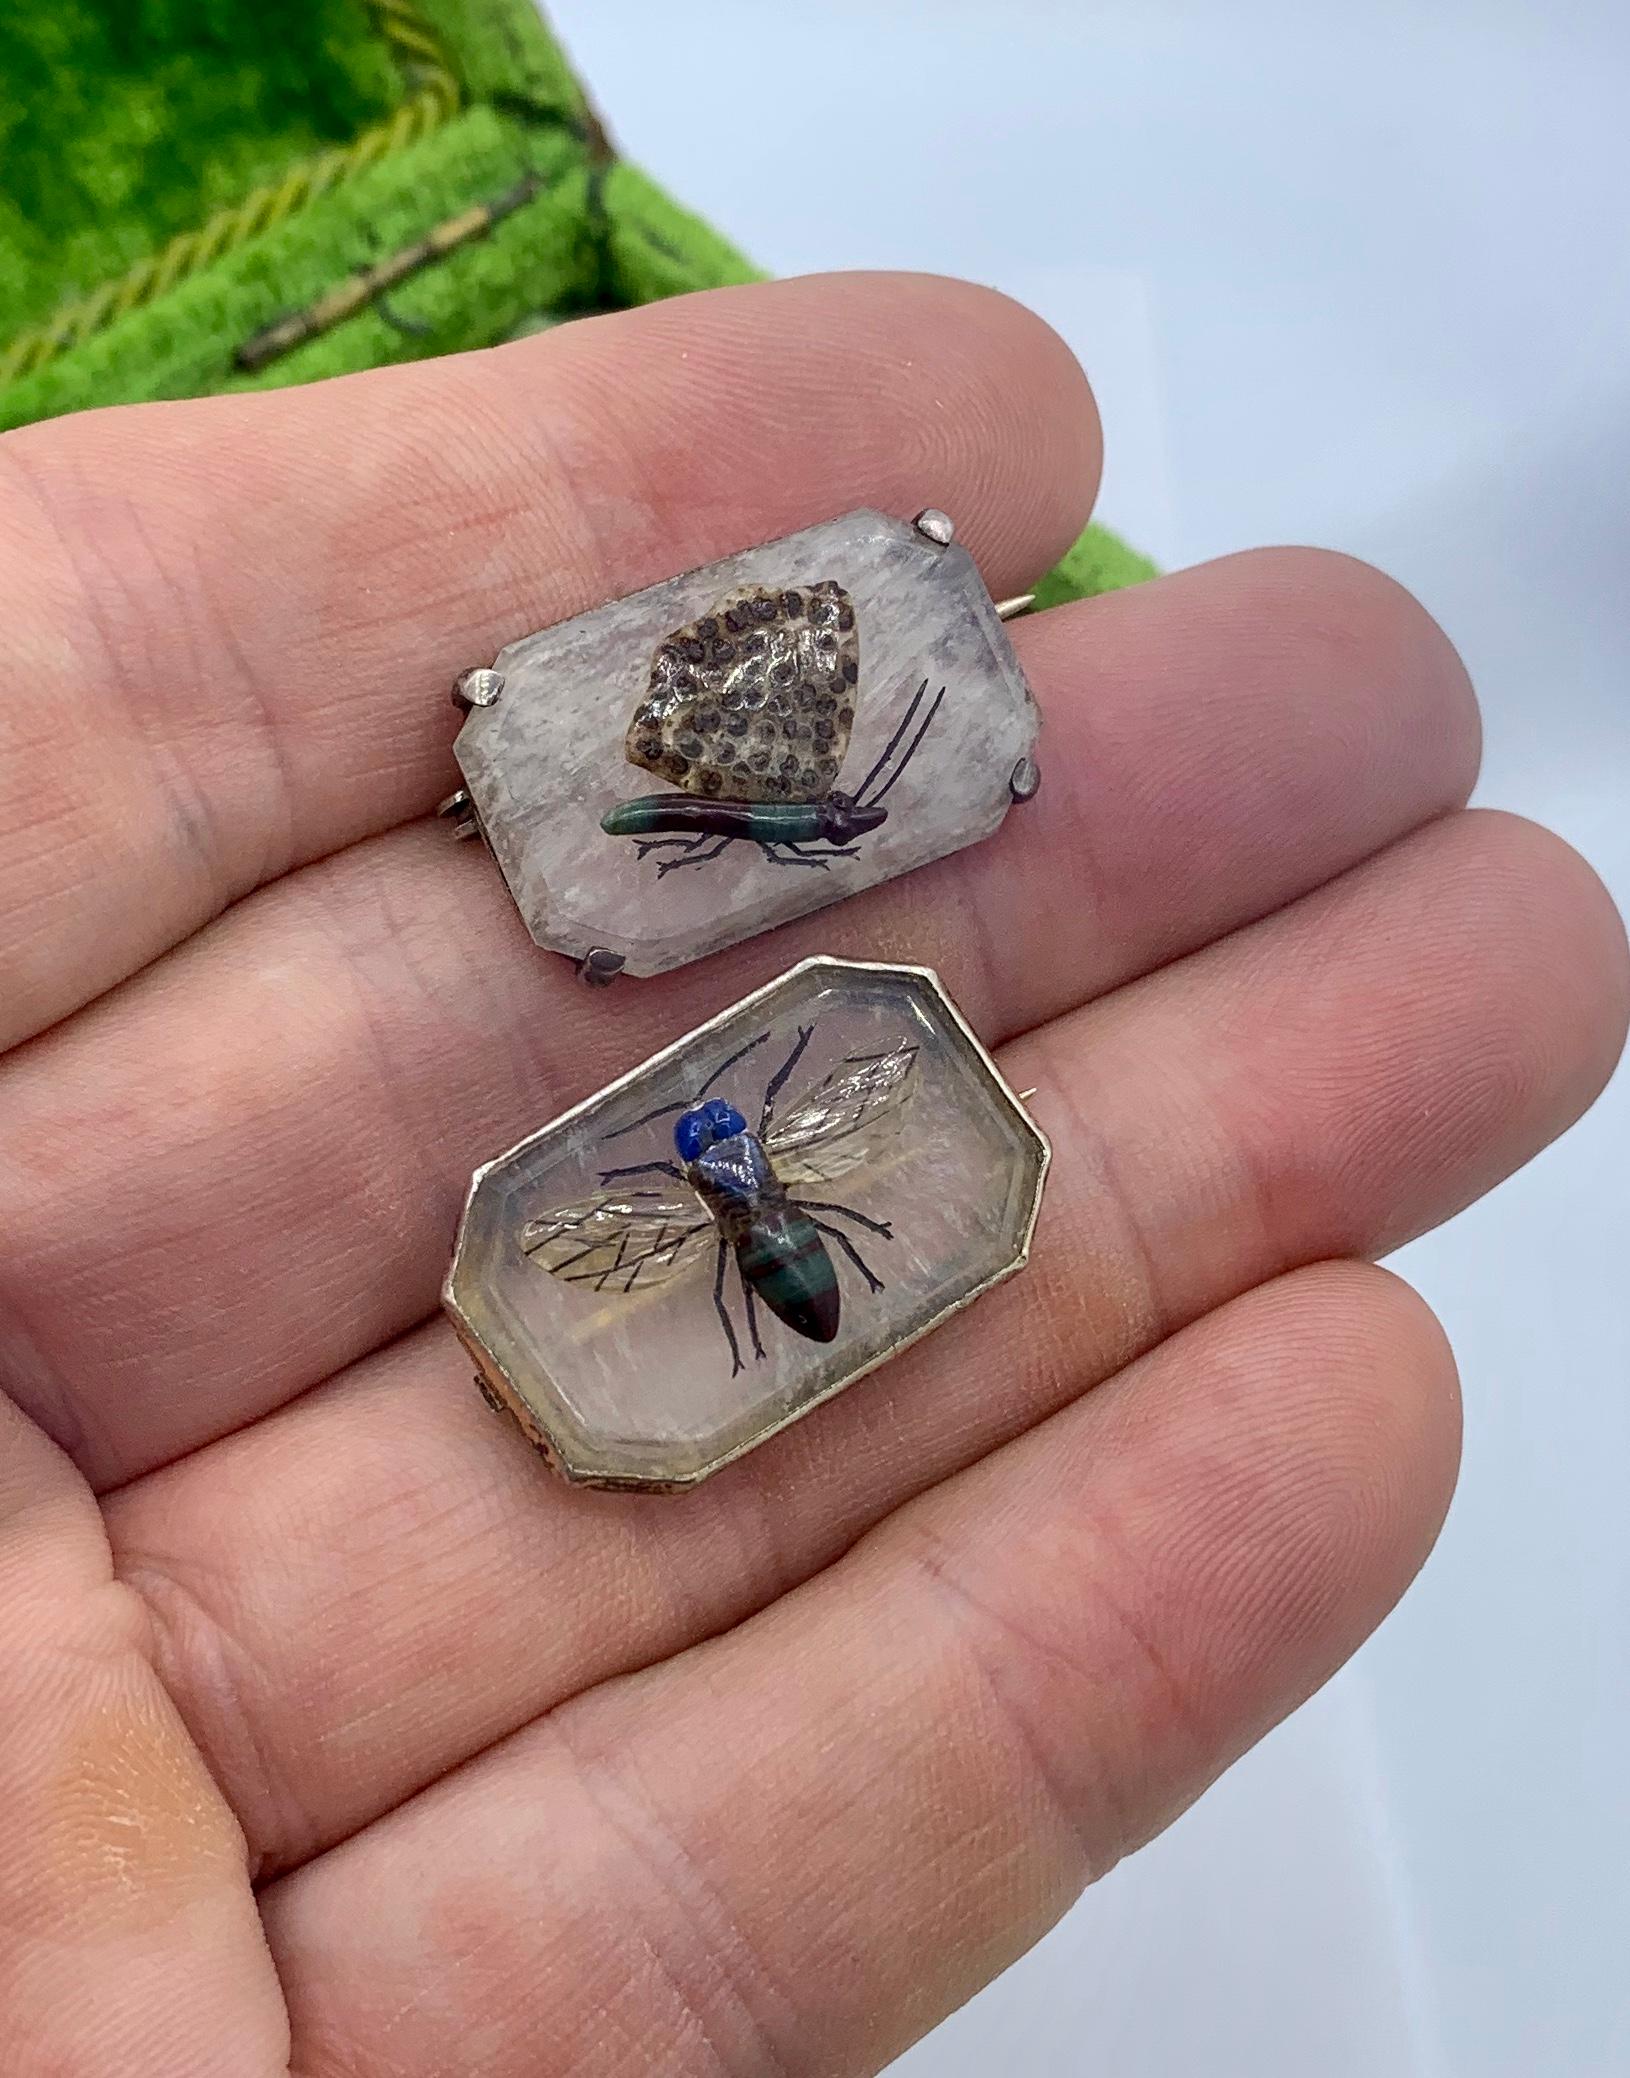 A wonderful and rare pair of antique Butterfly and Bee Insect Brooch Pins.  These extraordinary jewels are in the style of cameos or intaglios.  The insects are created with hardstones including Agate and Lapis Lazuli and set in carved Rock Crystal.